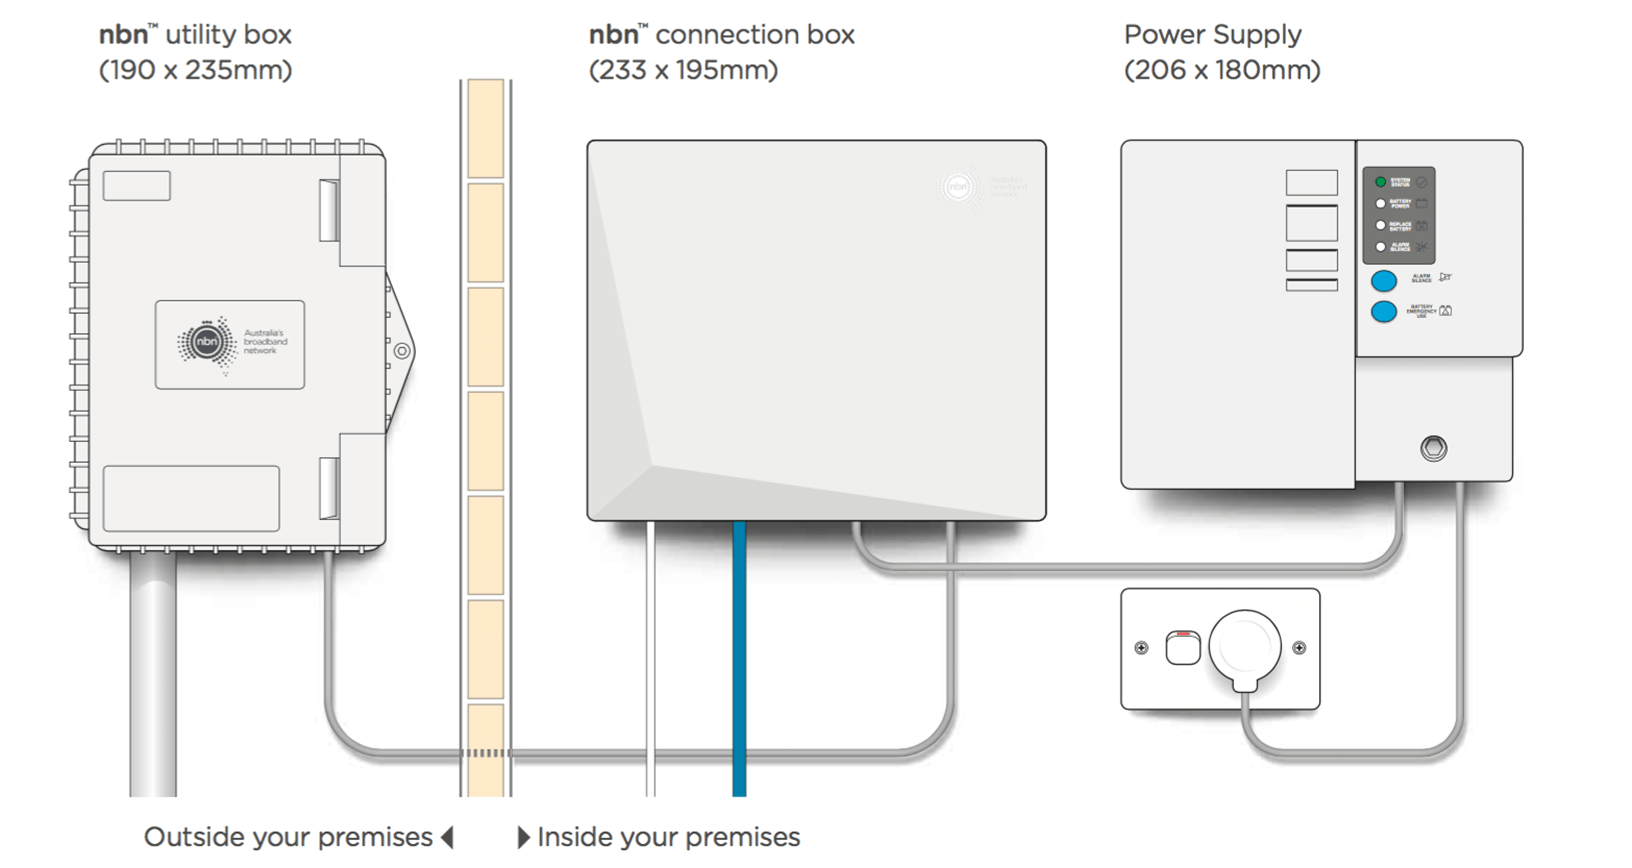 Diagram of the NBN connection box, power supply and utility box on a FTTP connection